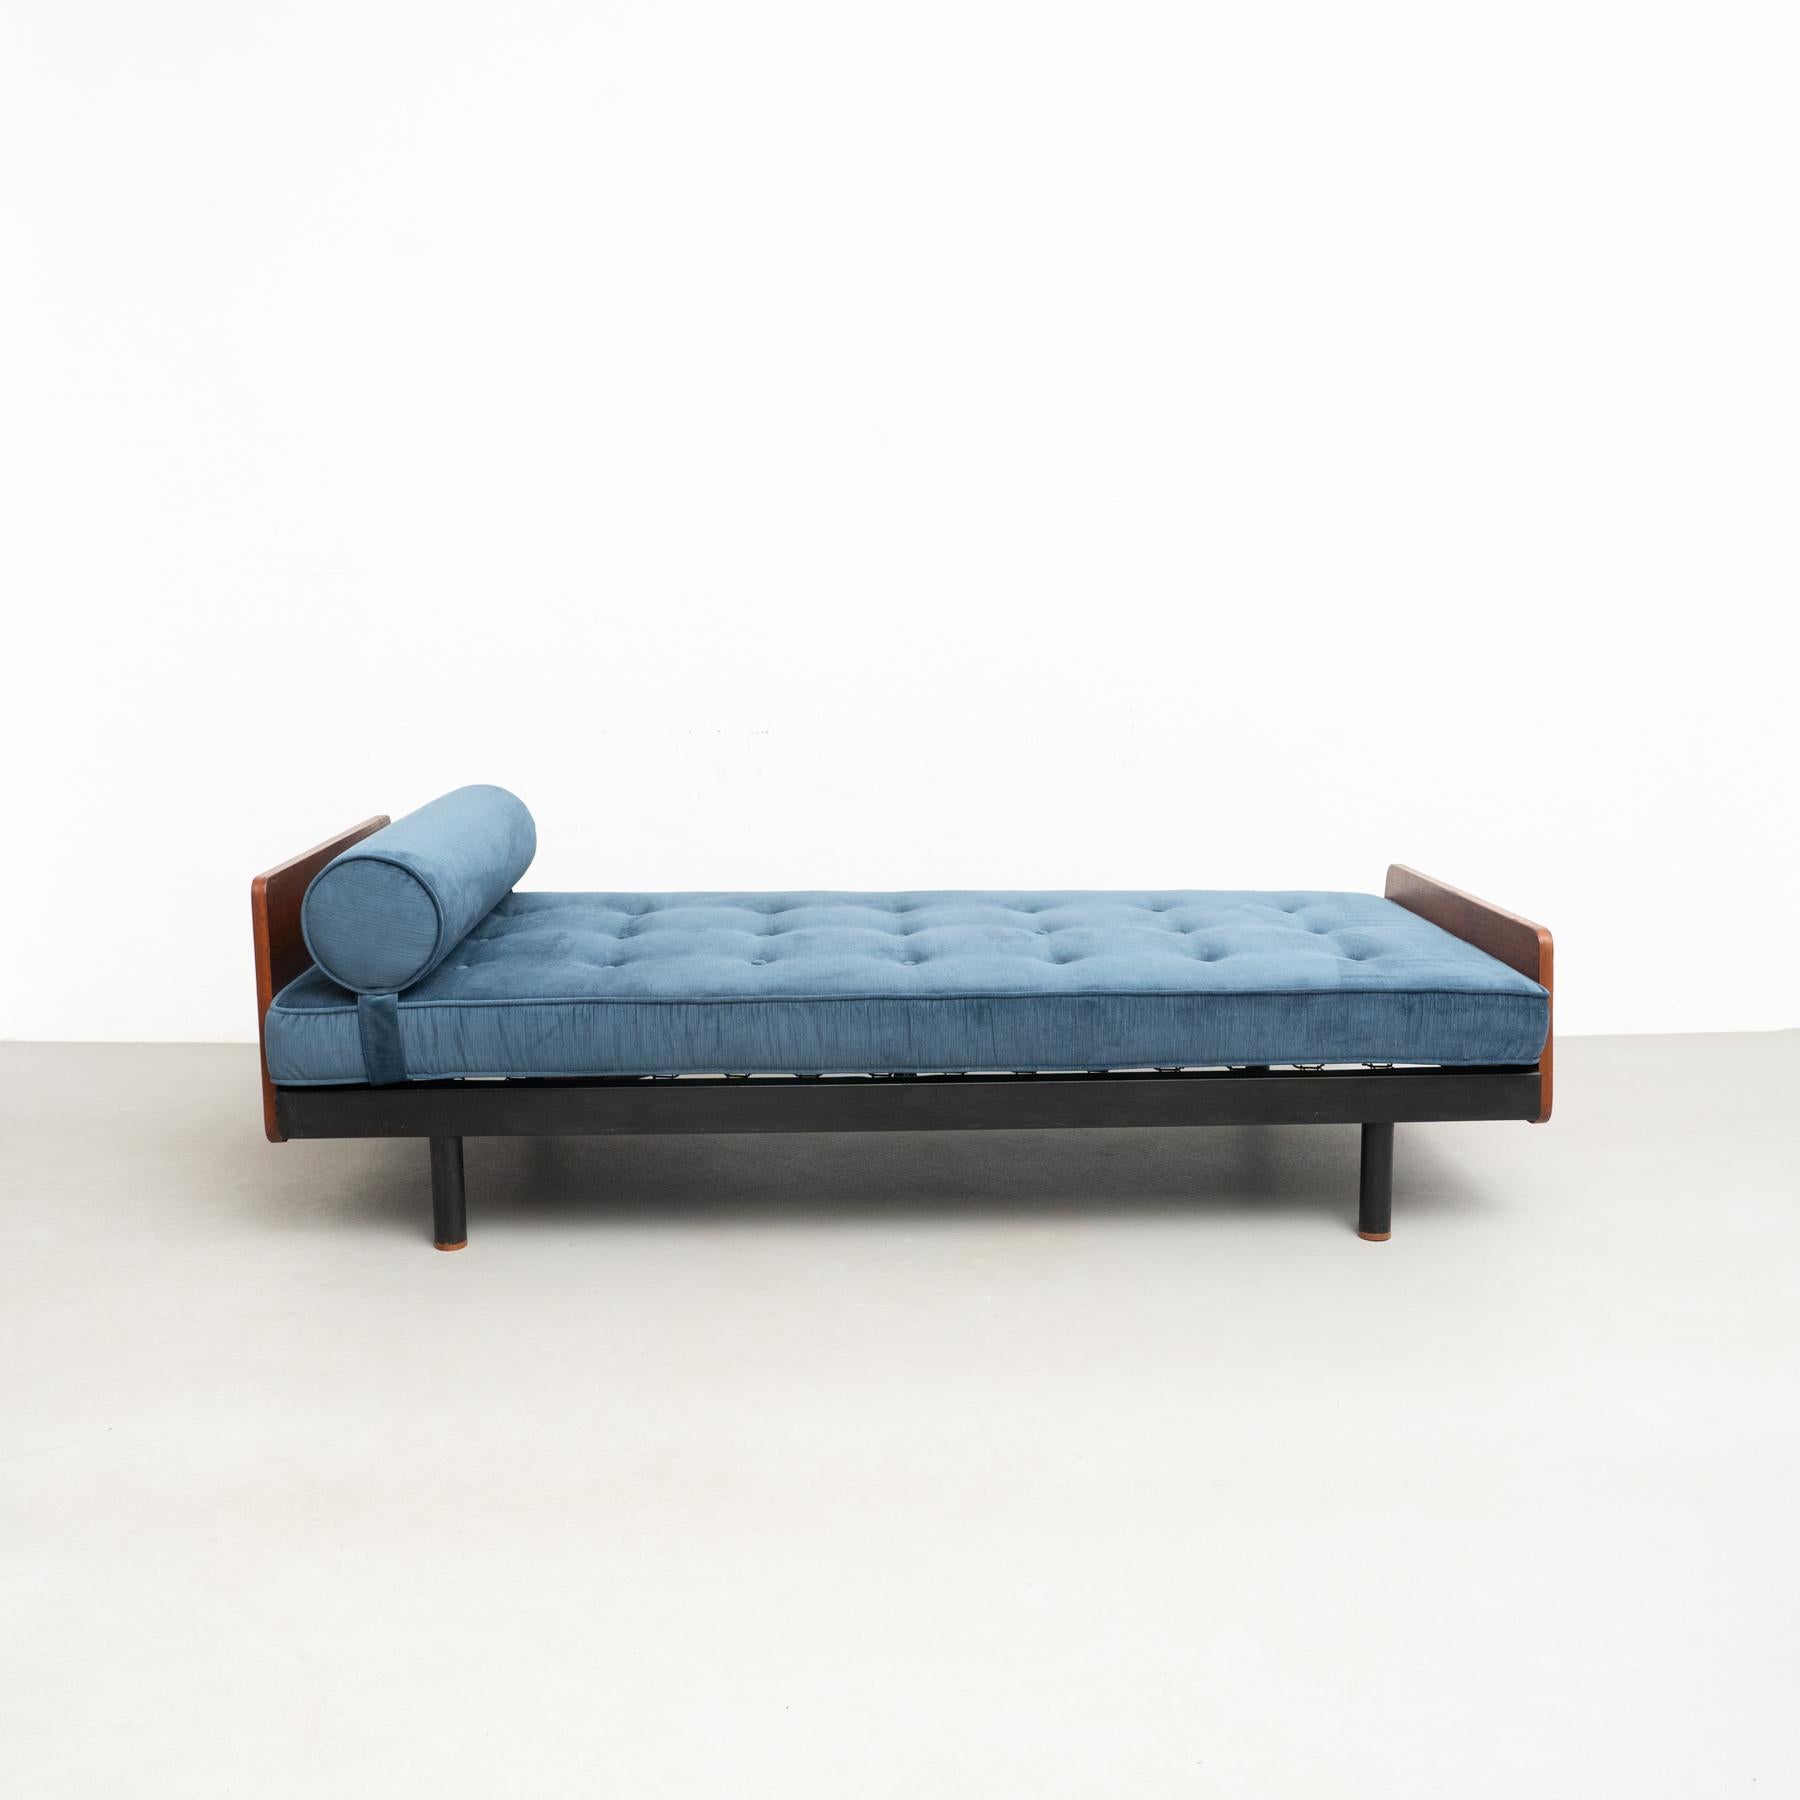 S.C.A.L. daybed designed by Jean Prouvé.

Manufactured by Ateliers Prouve, France, circa 1950.

Original preserved wooden boards.

This bed has been restored.

Metal frame, new upholstery, repainted.

Table has been done new according to